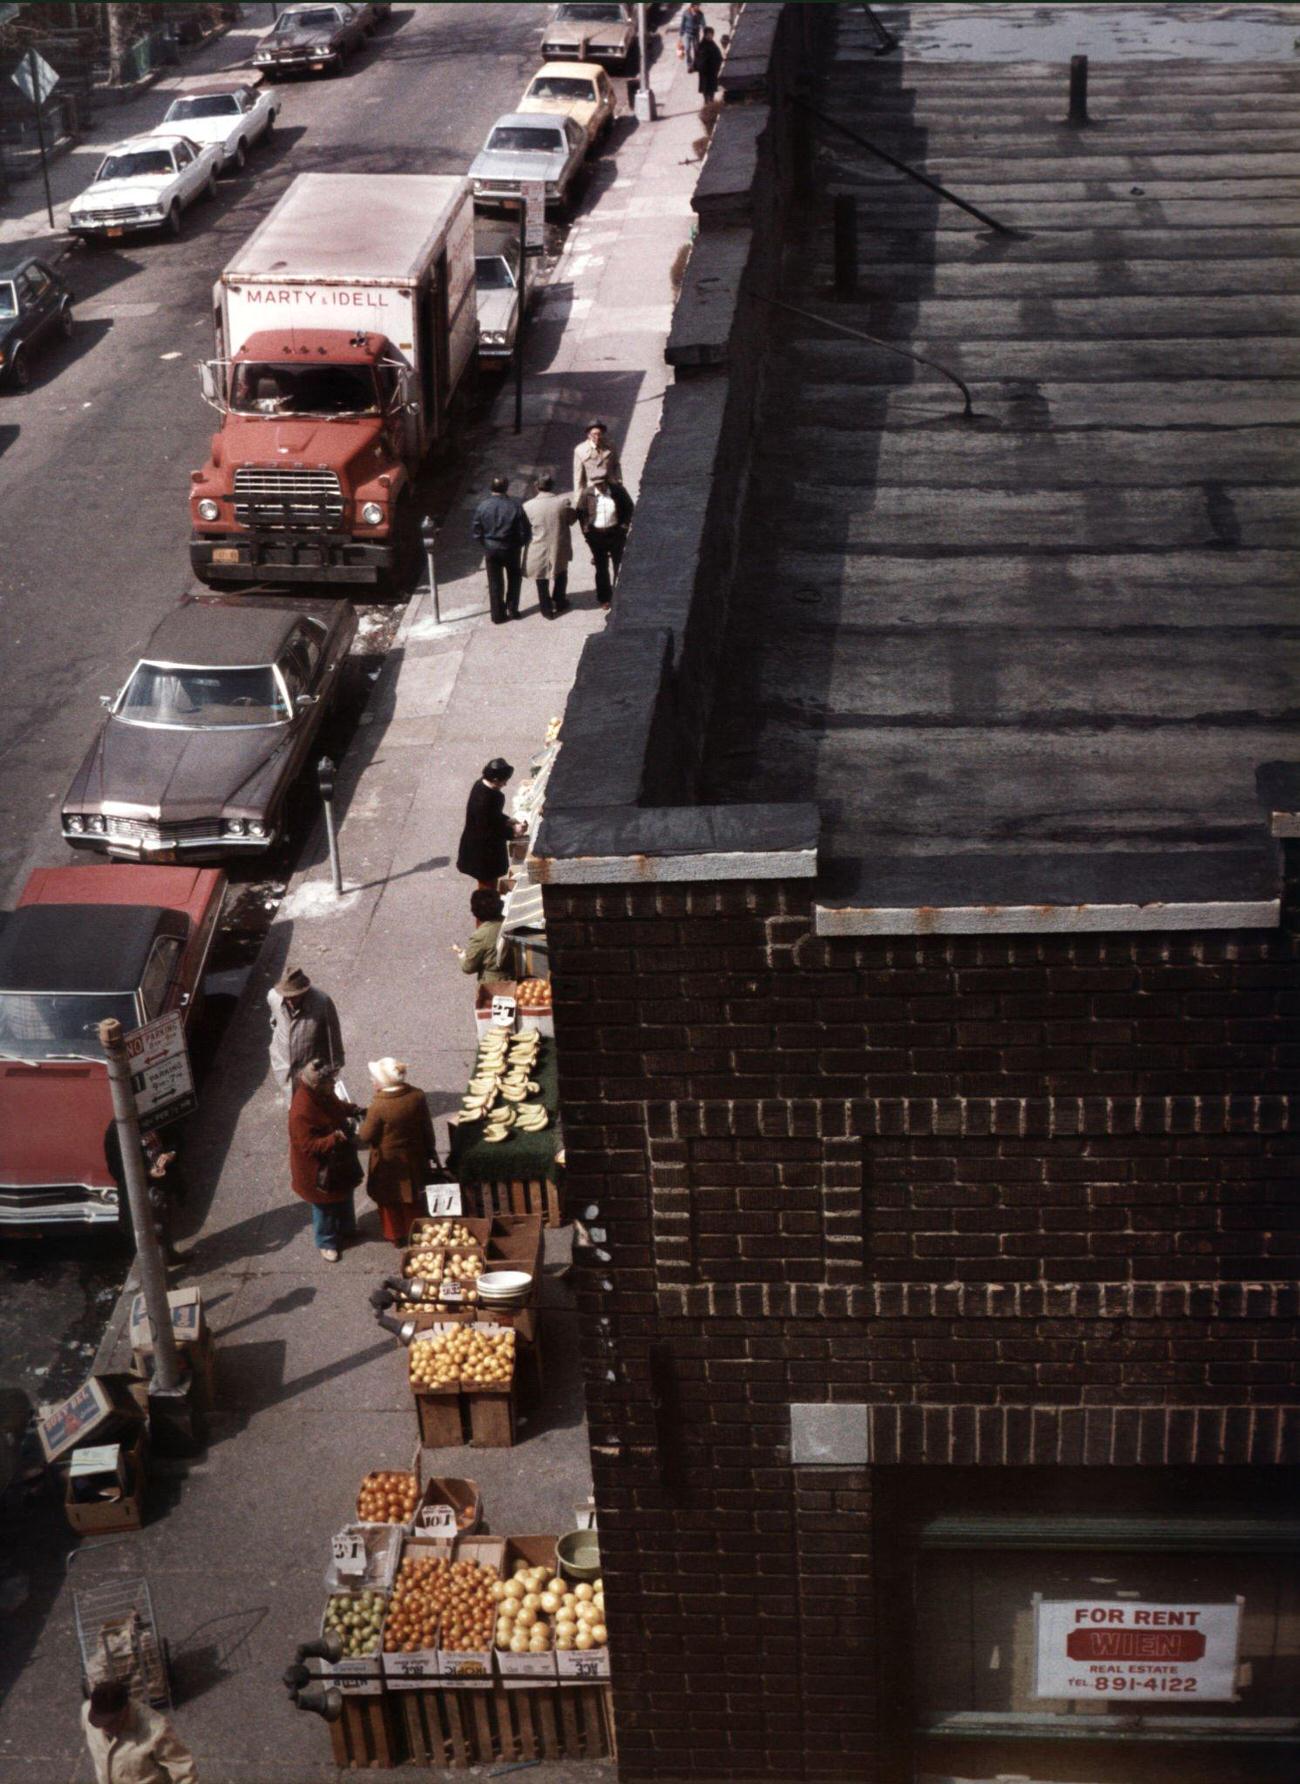 Elevated View Along A City Street In Brighton Beach With Pedestrians And Shoppers, Brooklyn, 1979